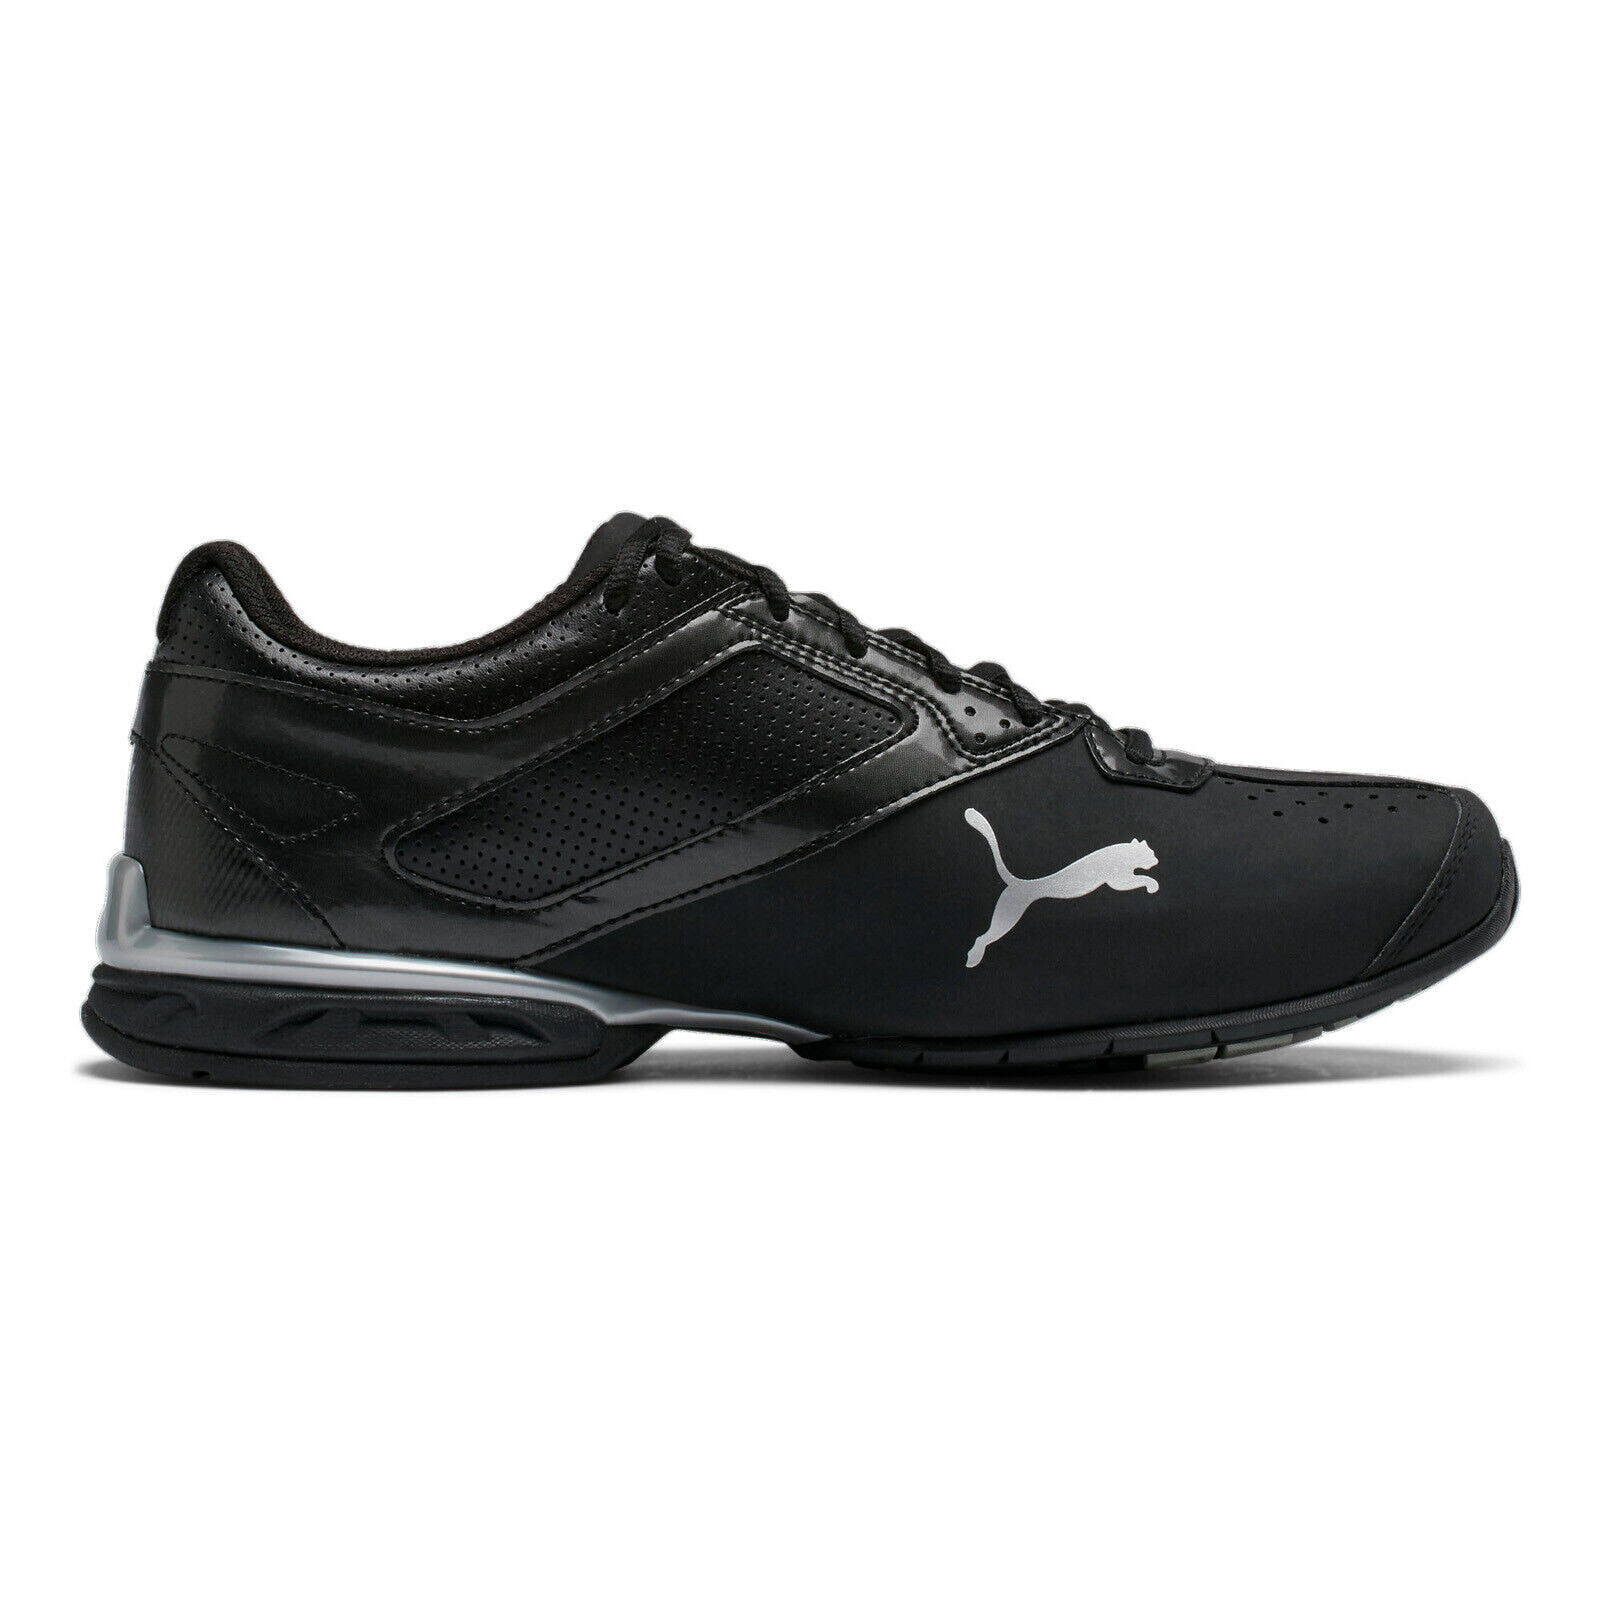 Puma Tazon 6 FM 18987303 Mens Black Leather Lace Up Athletic Running Shoes